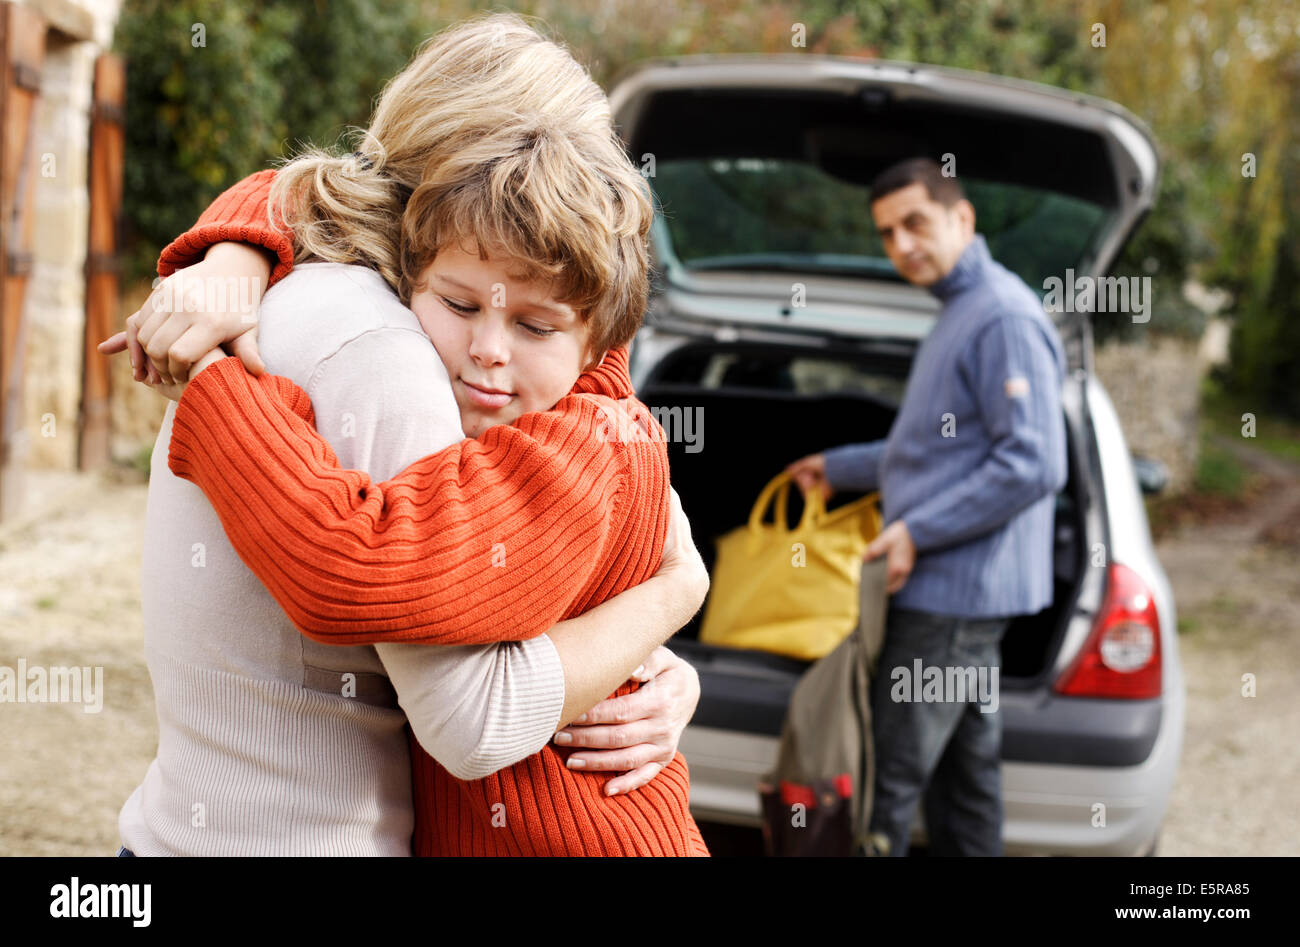 12 year old boy hugging his mother. Stock Photo